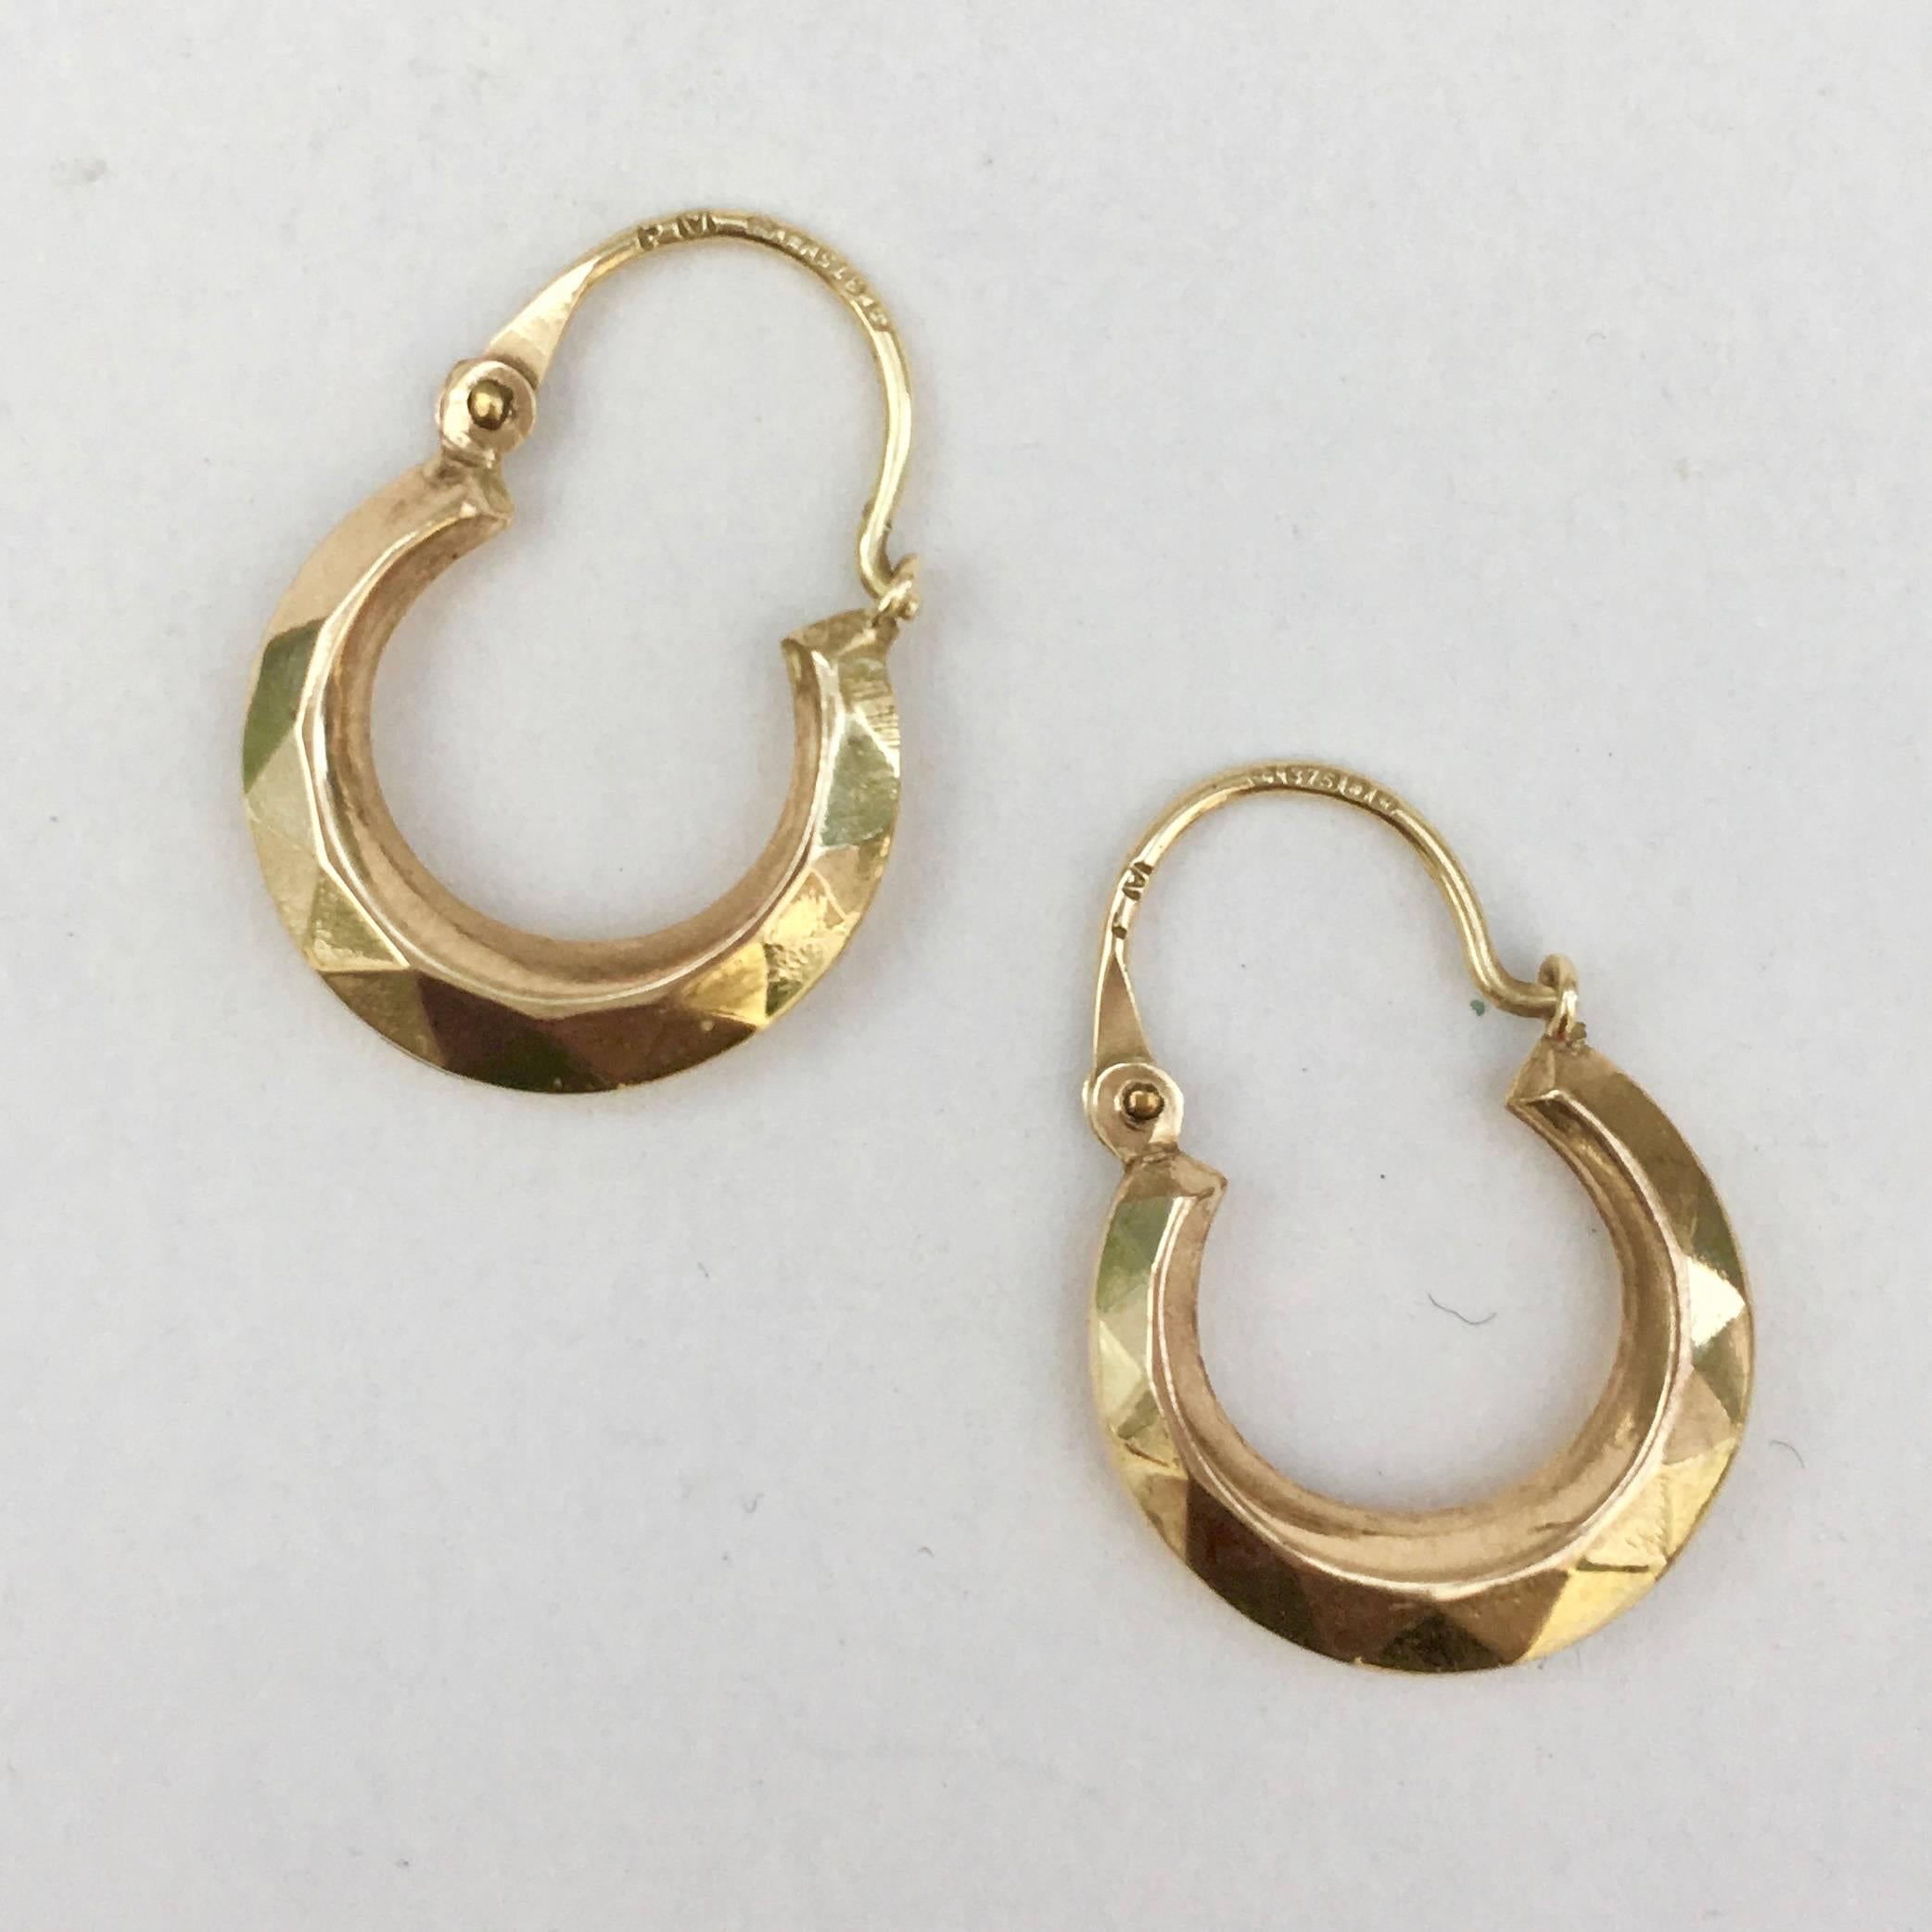 Contemporary Small Gold Hoops 1980s Vintage Jewelry Faceted Dainty Hoop Earrings